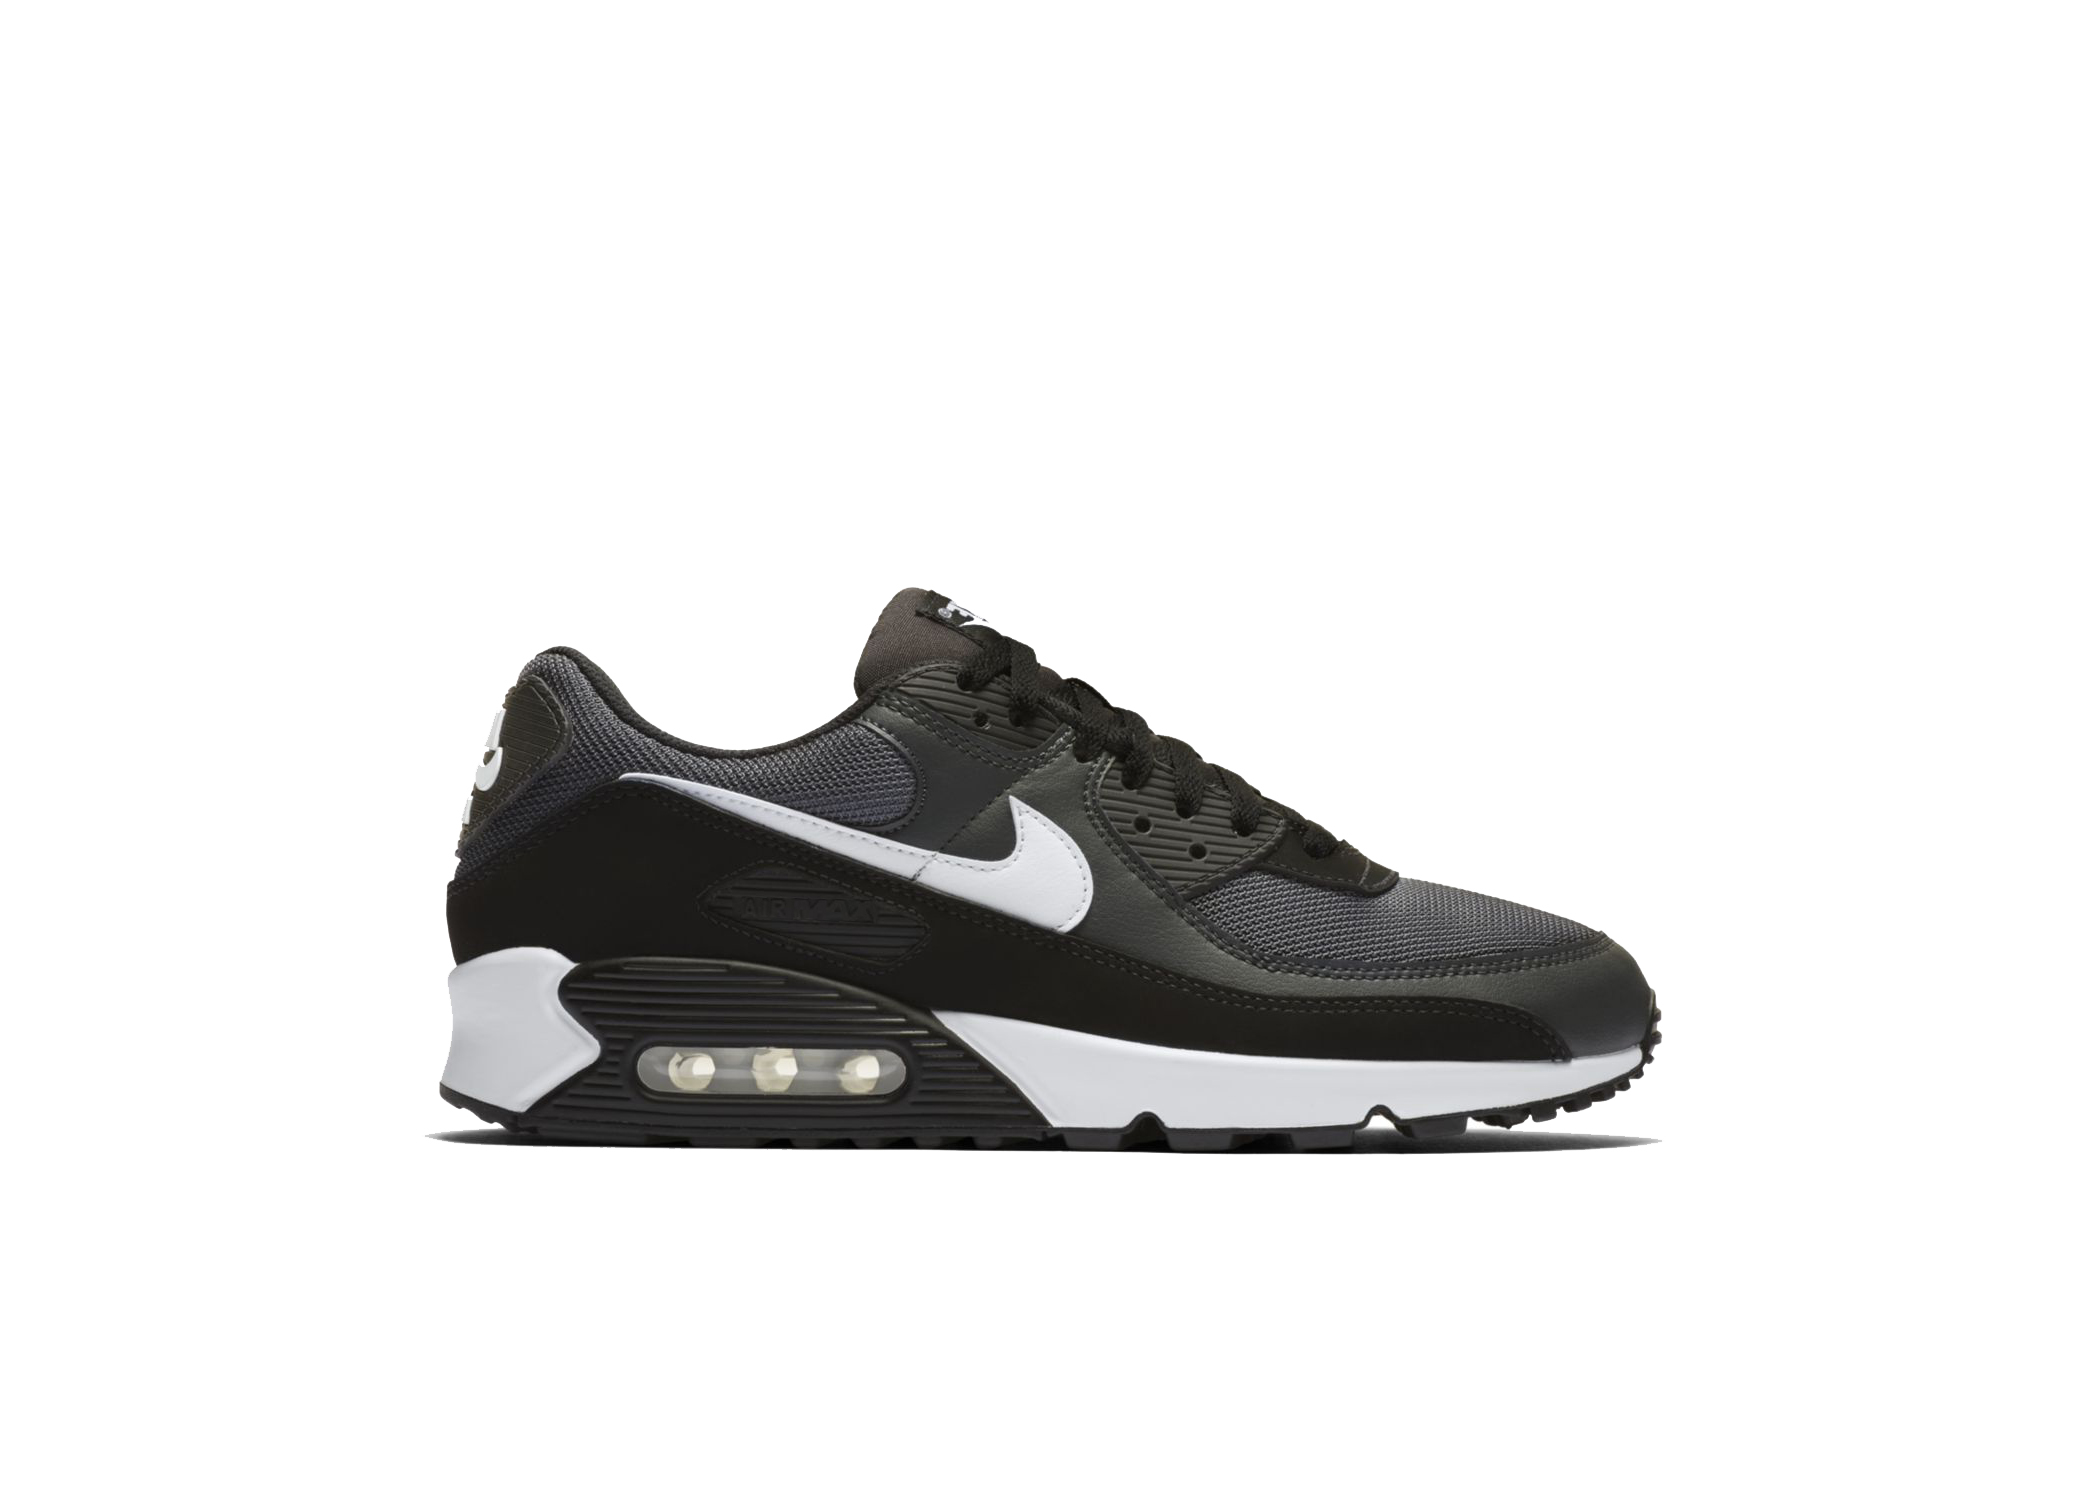 Nike Air Max 90 Shoes - Most Popular